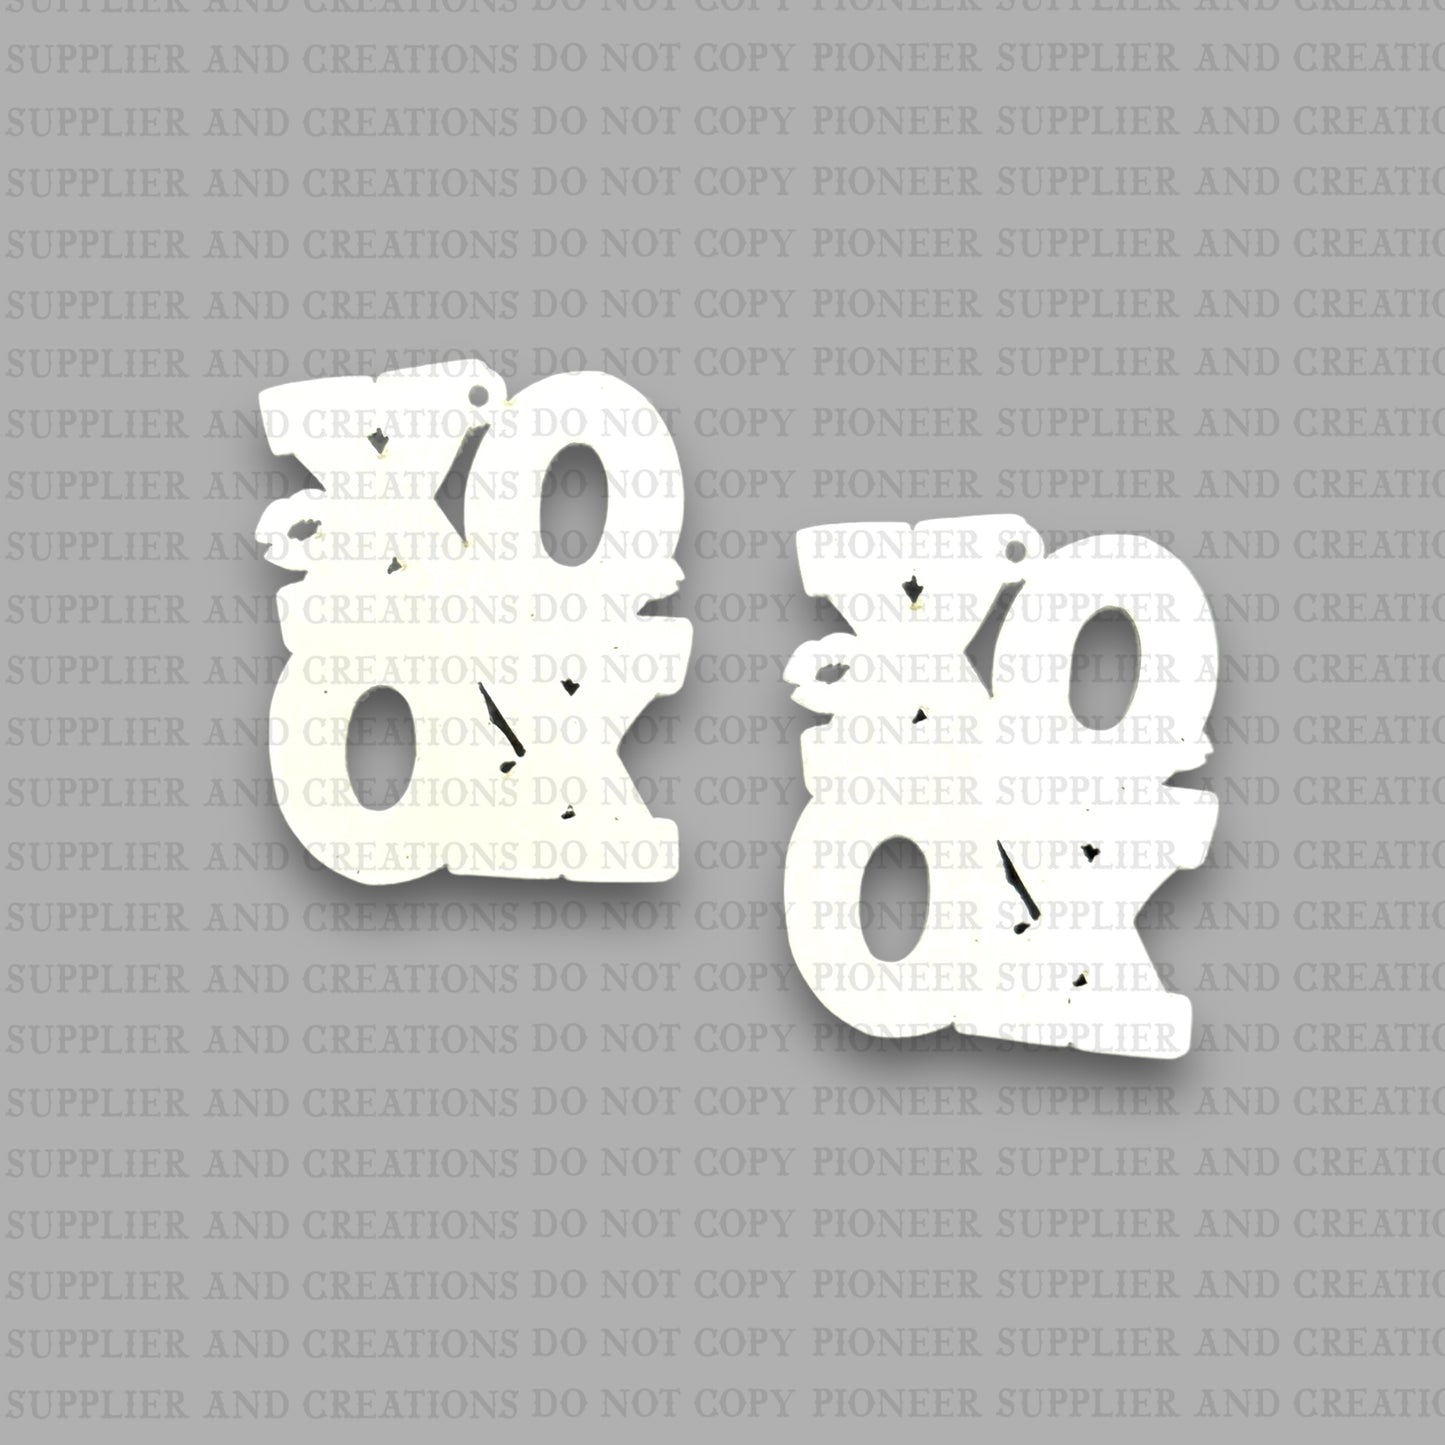 XO OX Earring Sublimation Blanks | Exclusive Pixel Pop